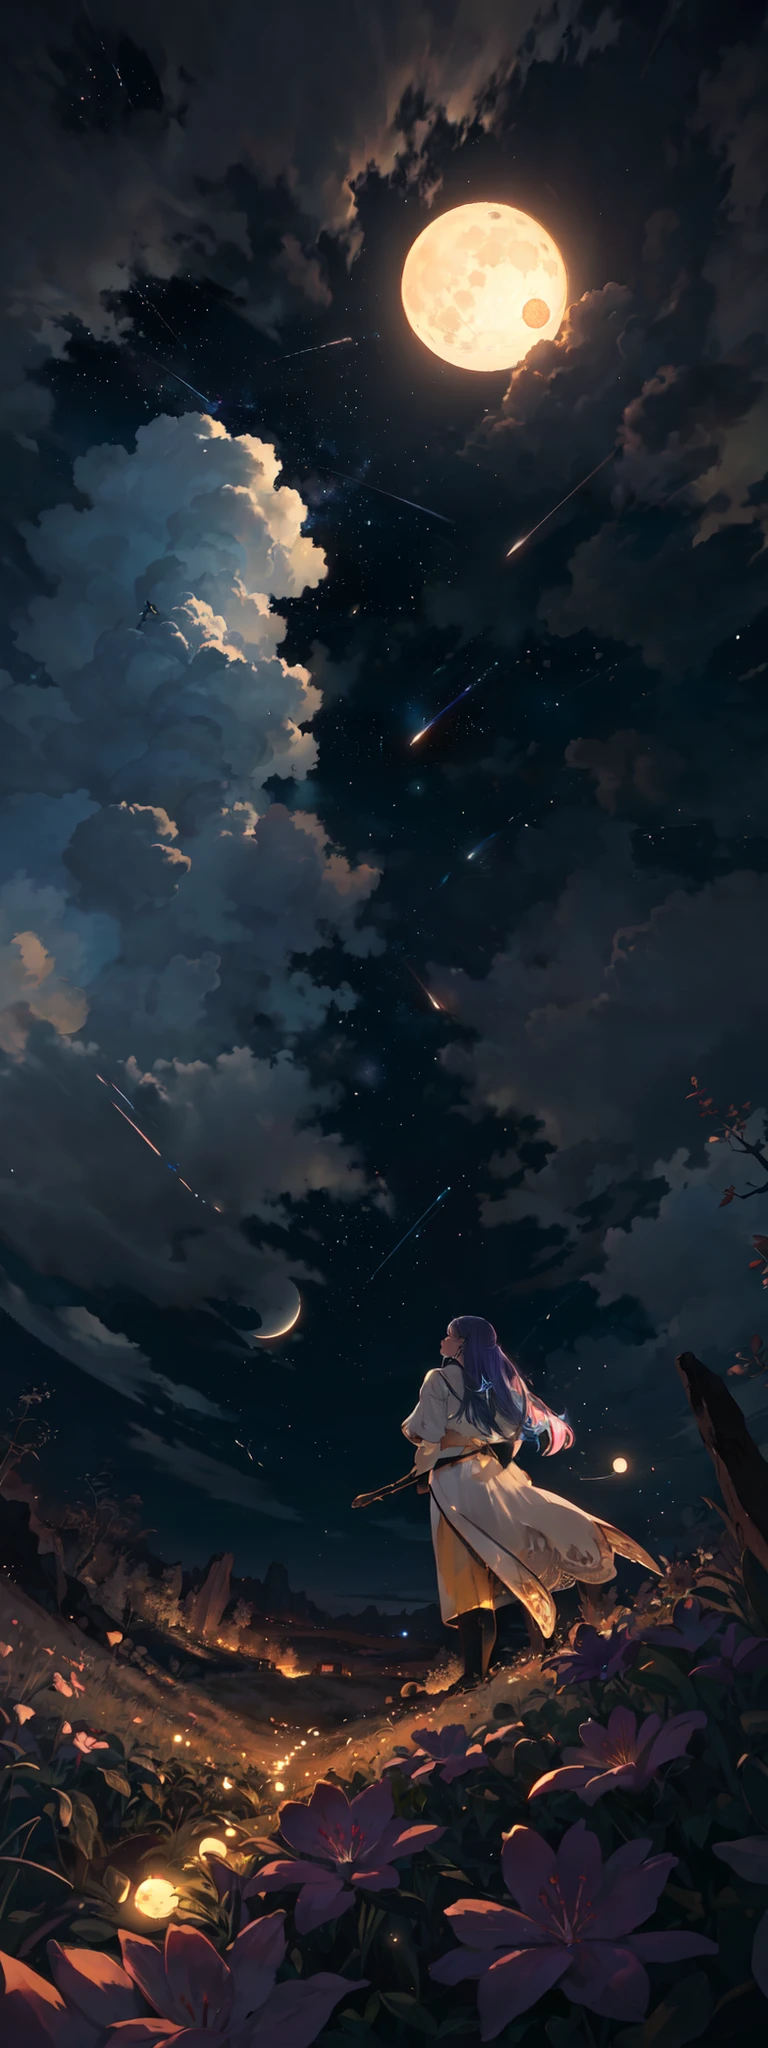 expansive landscape photograph , (a view from below that shows sky above and open field below), a girl standing on flower field looking up, (full moon:1.2), ( shooting stars:0.9), (nebula:1.3), distant mountain, tree BREAK
production art, (warm light source:1.2), (Firefly:1.2), lamp, lot of purple and orange, intricate details, volumetric lighting BREAK
(masterpiece:1.2), (best quality), 4k, ultra-detailed, (dynamic composition:1.4), highly detailed, colorful details,( iridescent colors:1.2), (glowing lighting, atmospheric lighting), dreamy, magical, (solo:1.2)